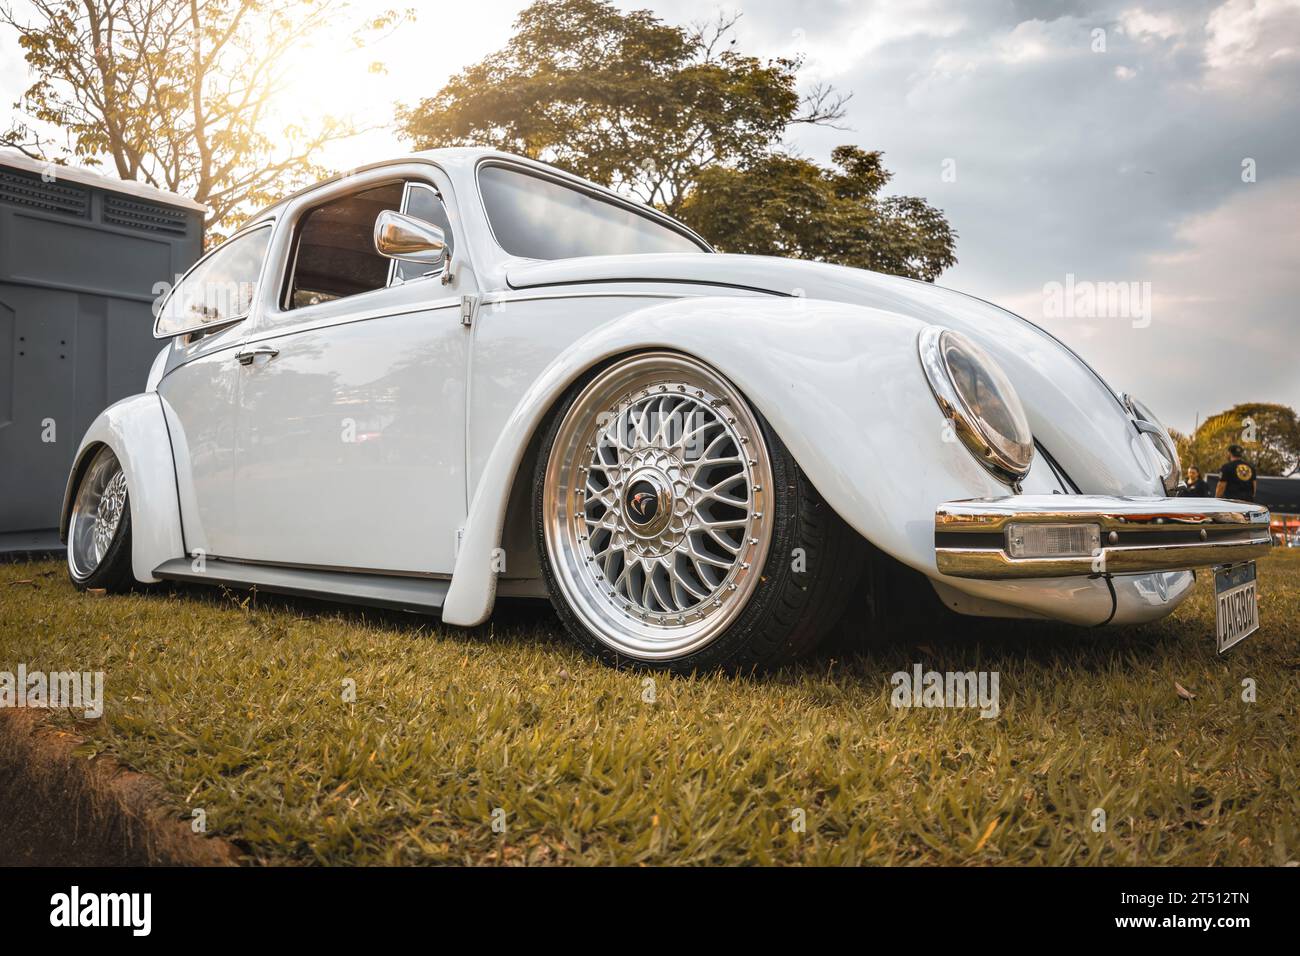 A classic Volkswagem Fusca Beetle 1971 on display at a vintage car fair show in the city of Londrina, Brazil. Annual vintage car meeting. Stock Photo